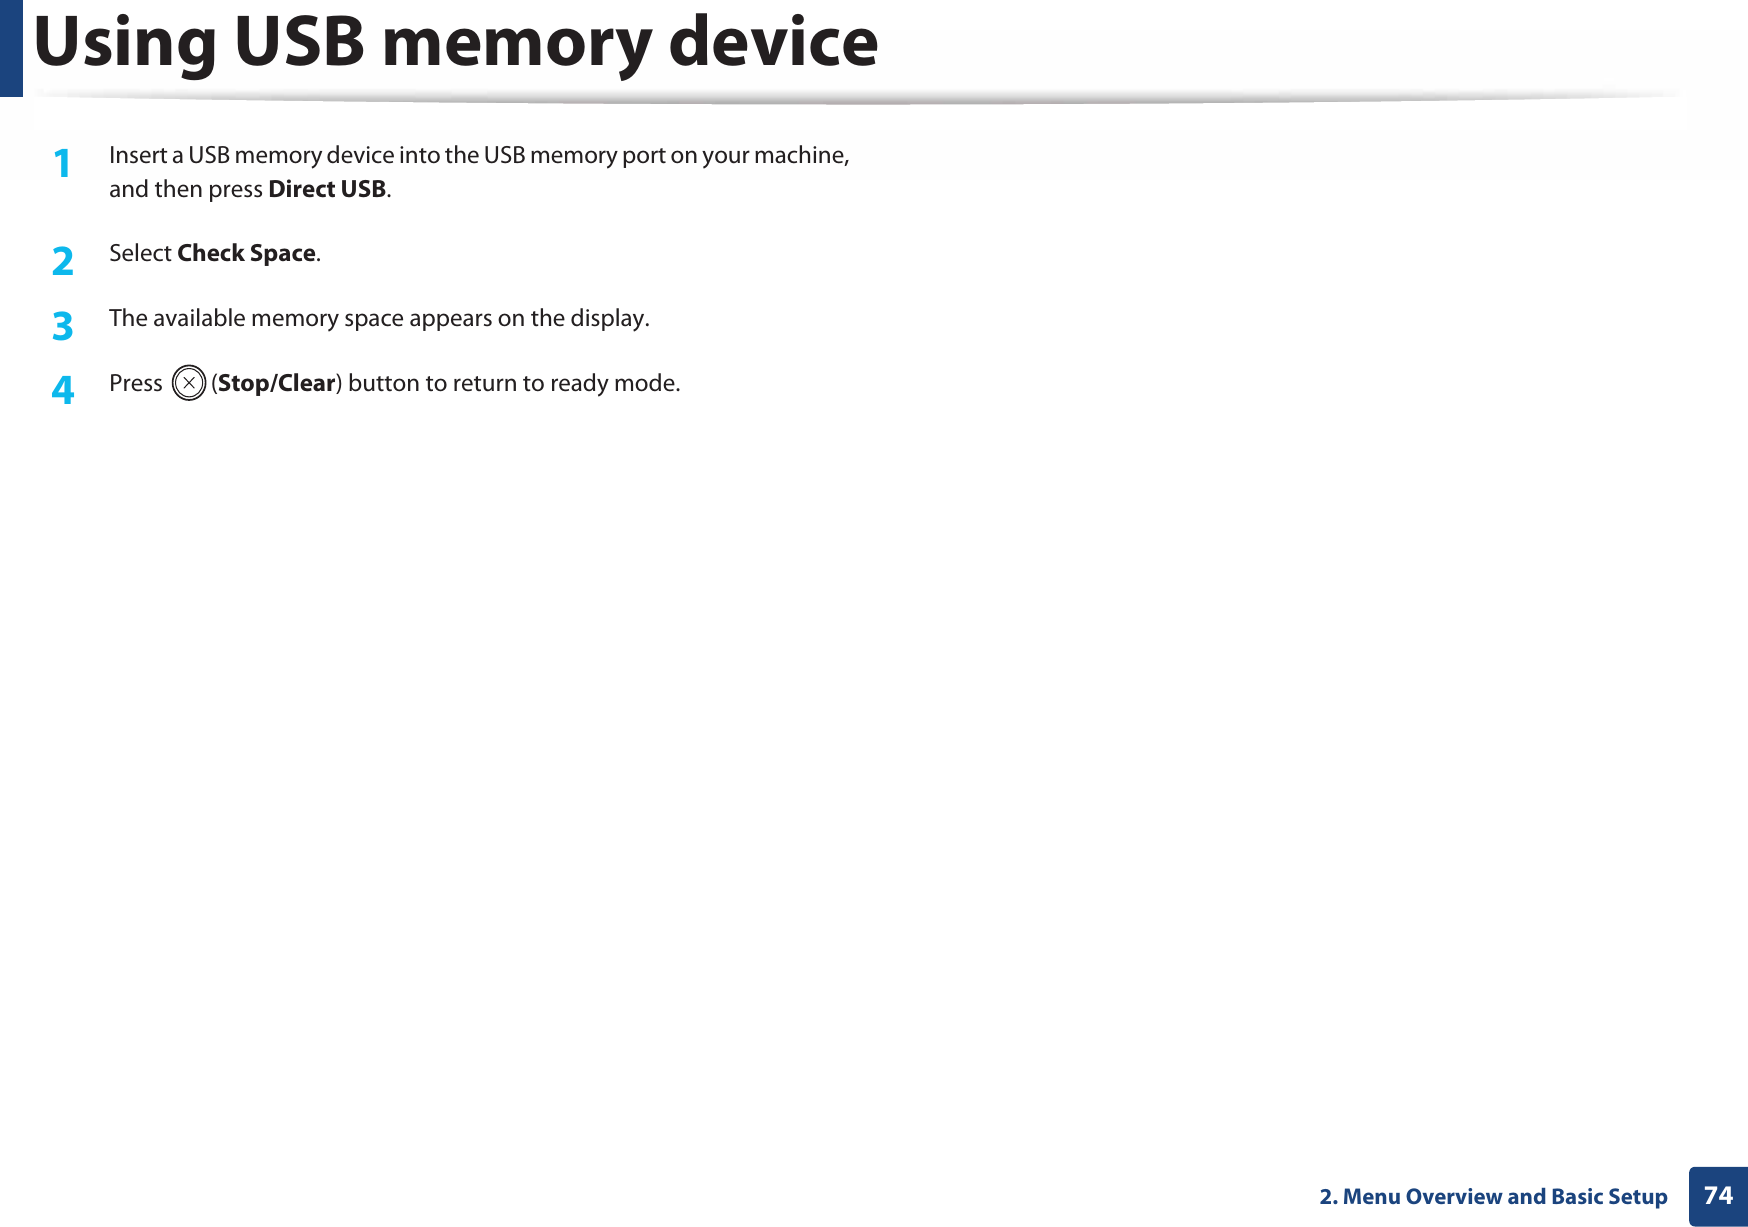 Using USB memory device742. Menu Overview and Basic Setup1Insert a USB memory device into the USB memory port on your machine, and then press Direct USB.2  Select Check Space.3  The available memory space appears on the display.4  Press (Stop/Clear) button to return to ready mode.